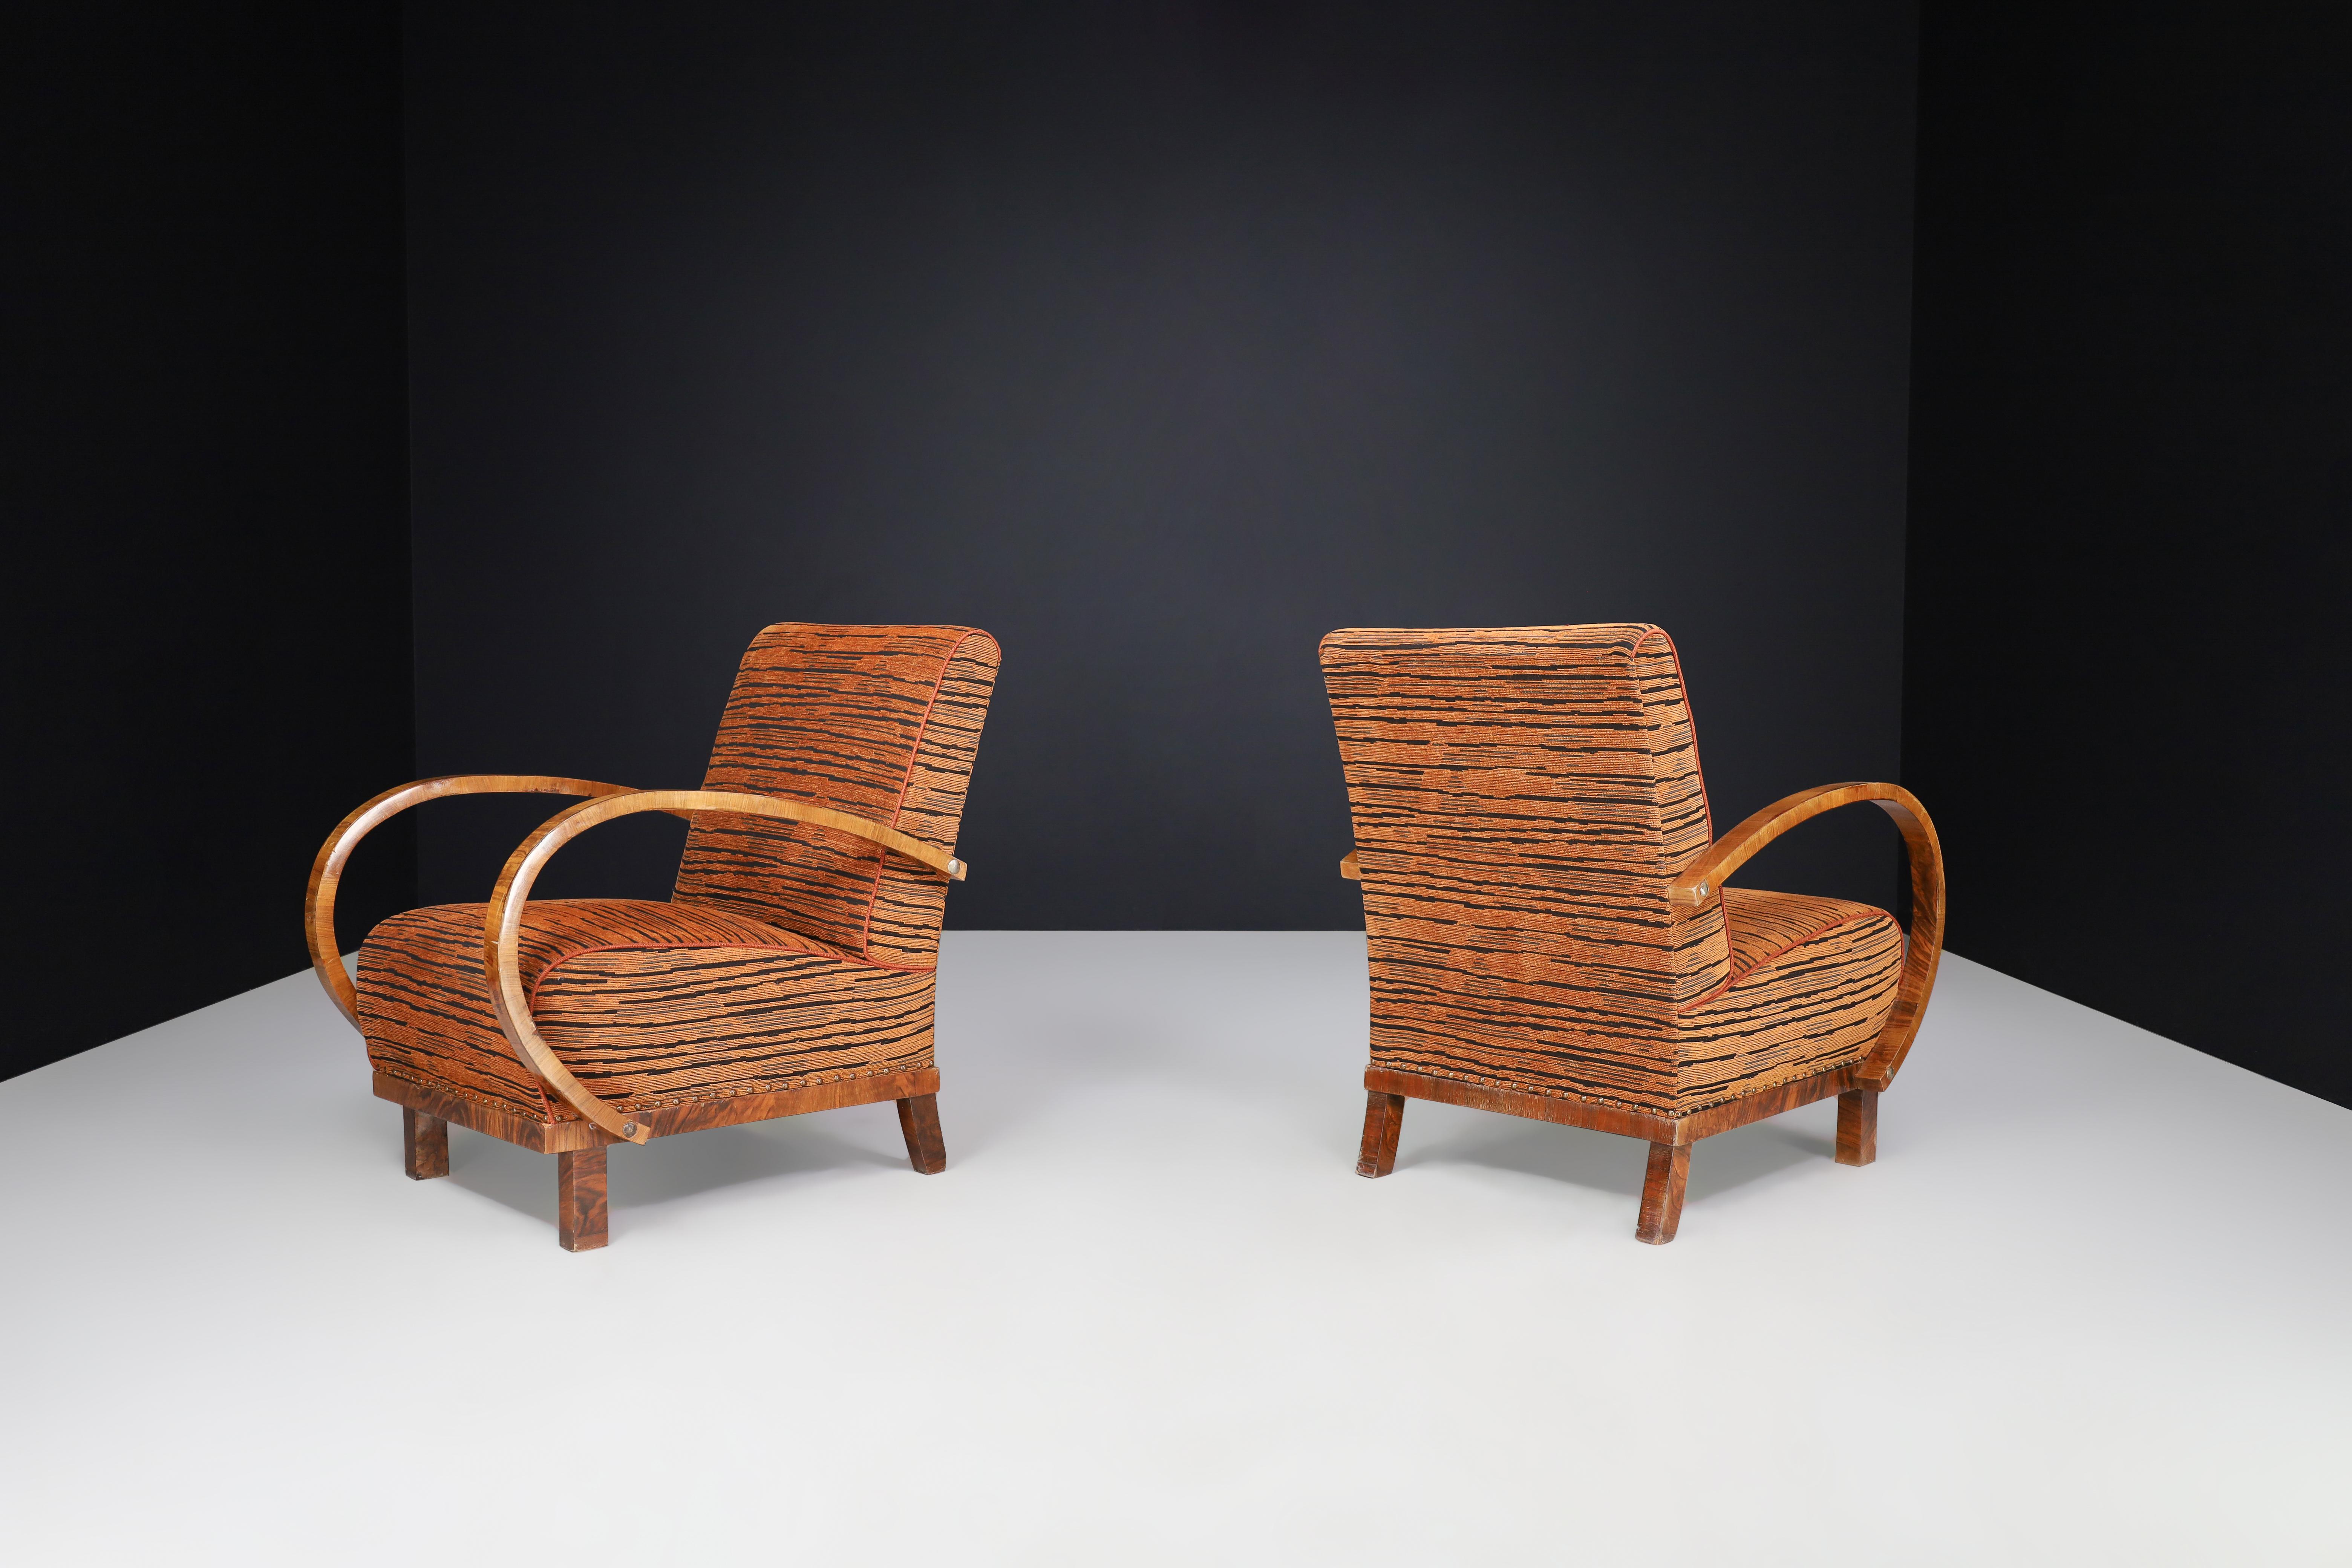 Austrian Art Deco Armchairs in Walnut in New Upholstery, Austria 1930s For Sale